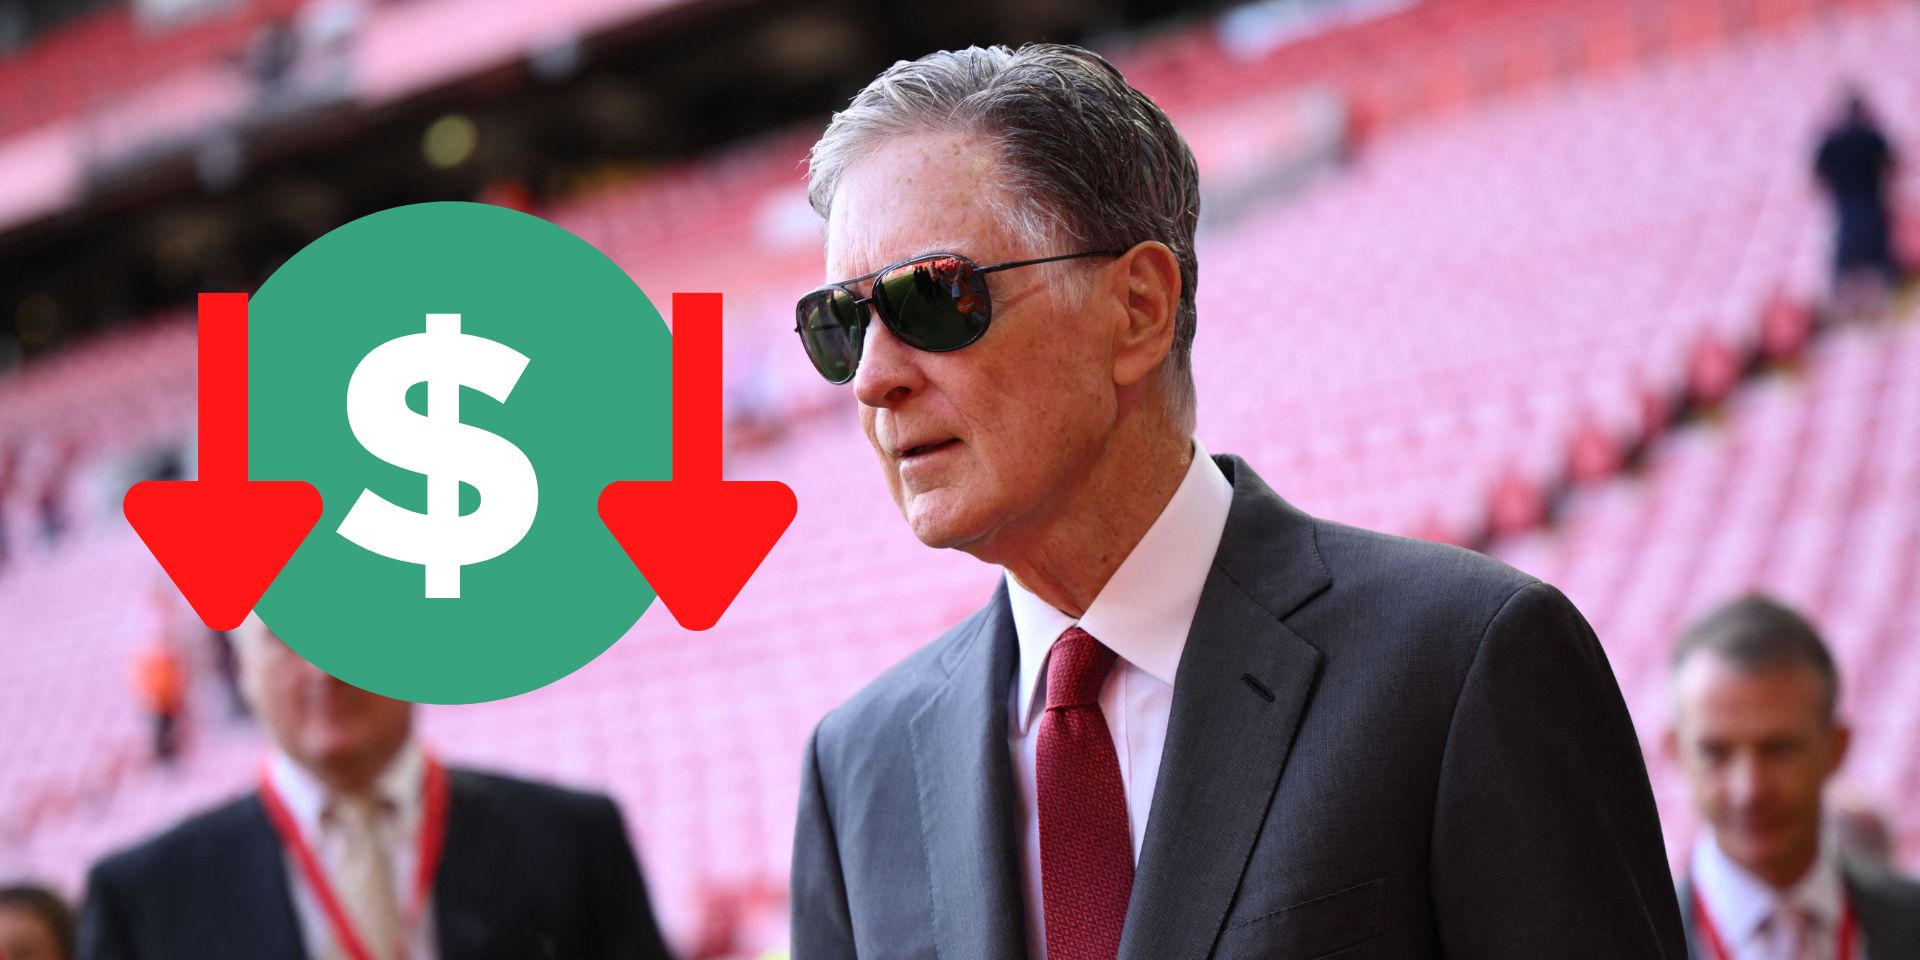 Liverpool’s value has dropped $400million in past ‘few months’ amidst FSG sale – report